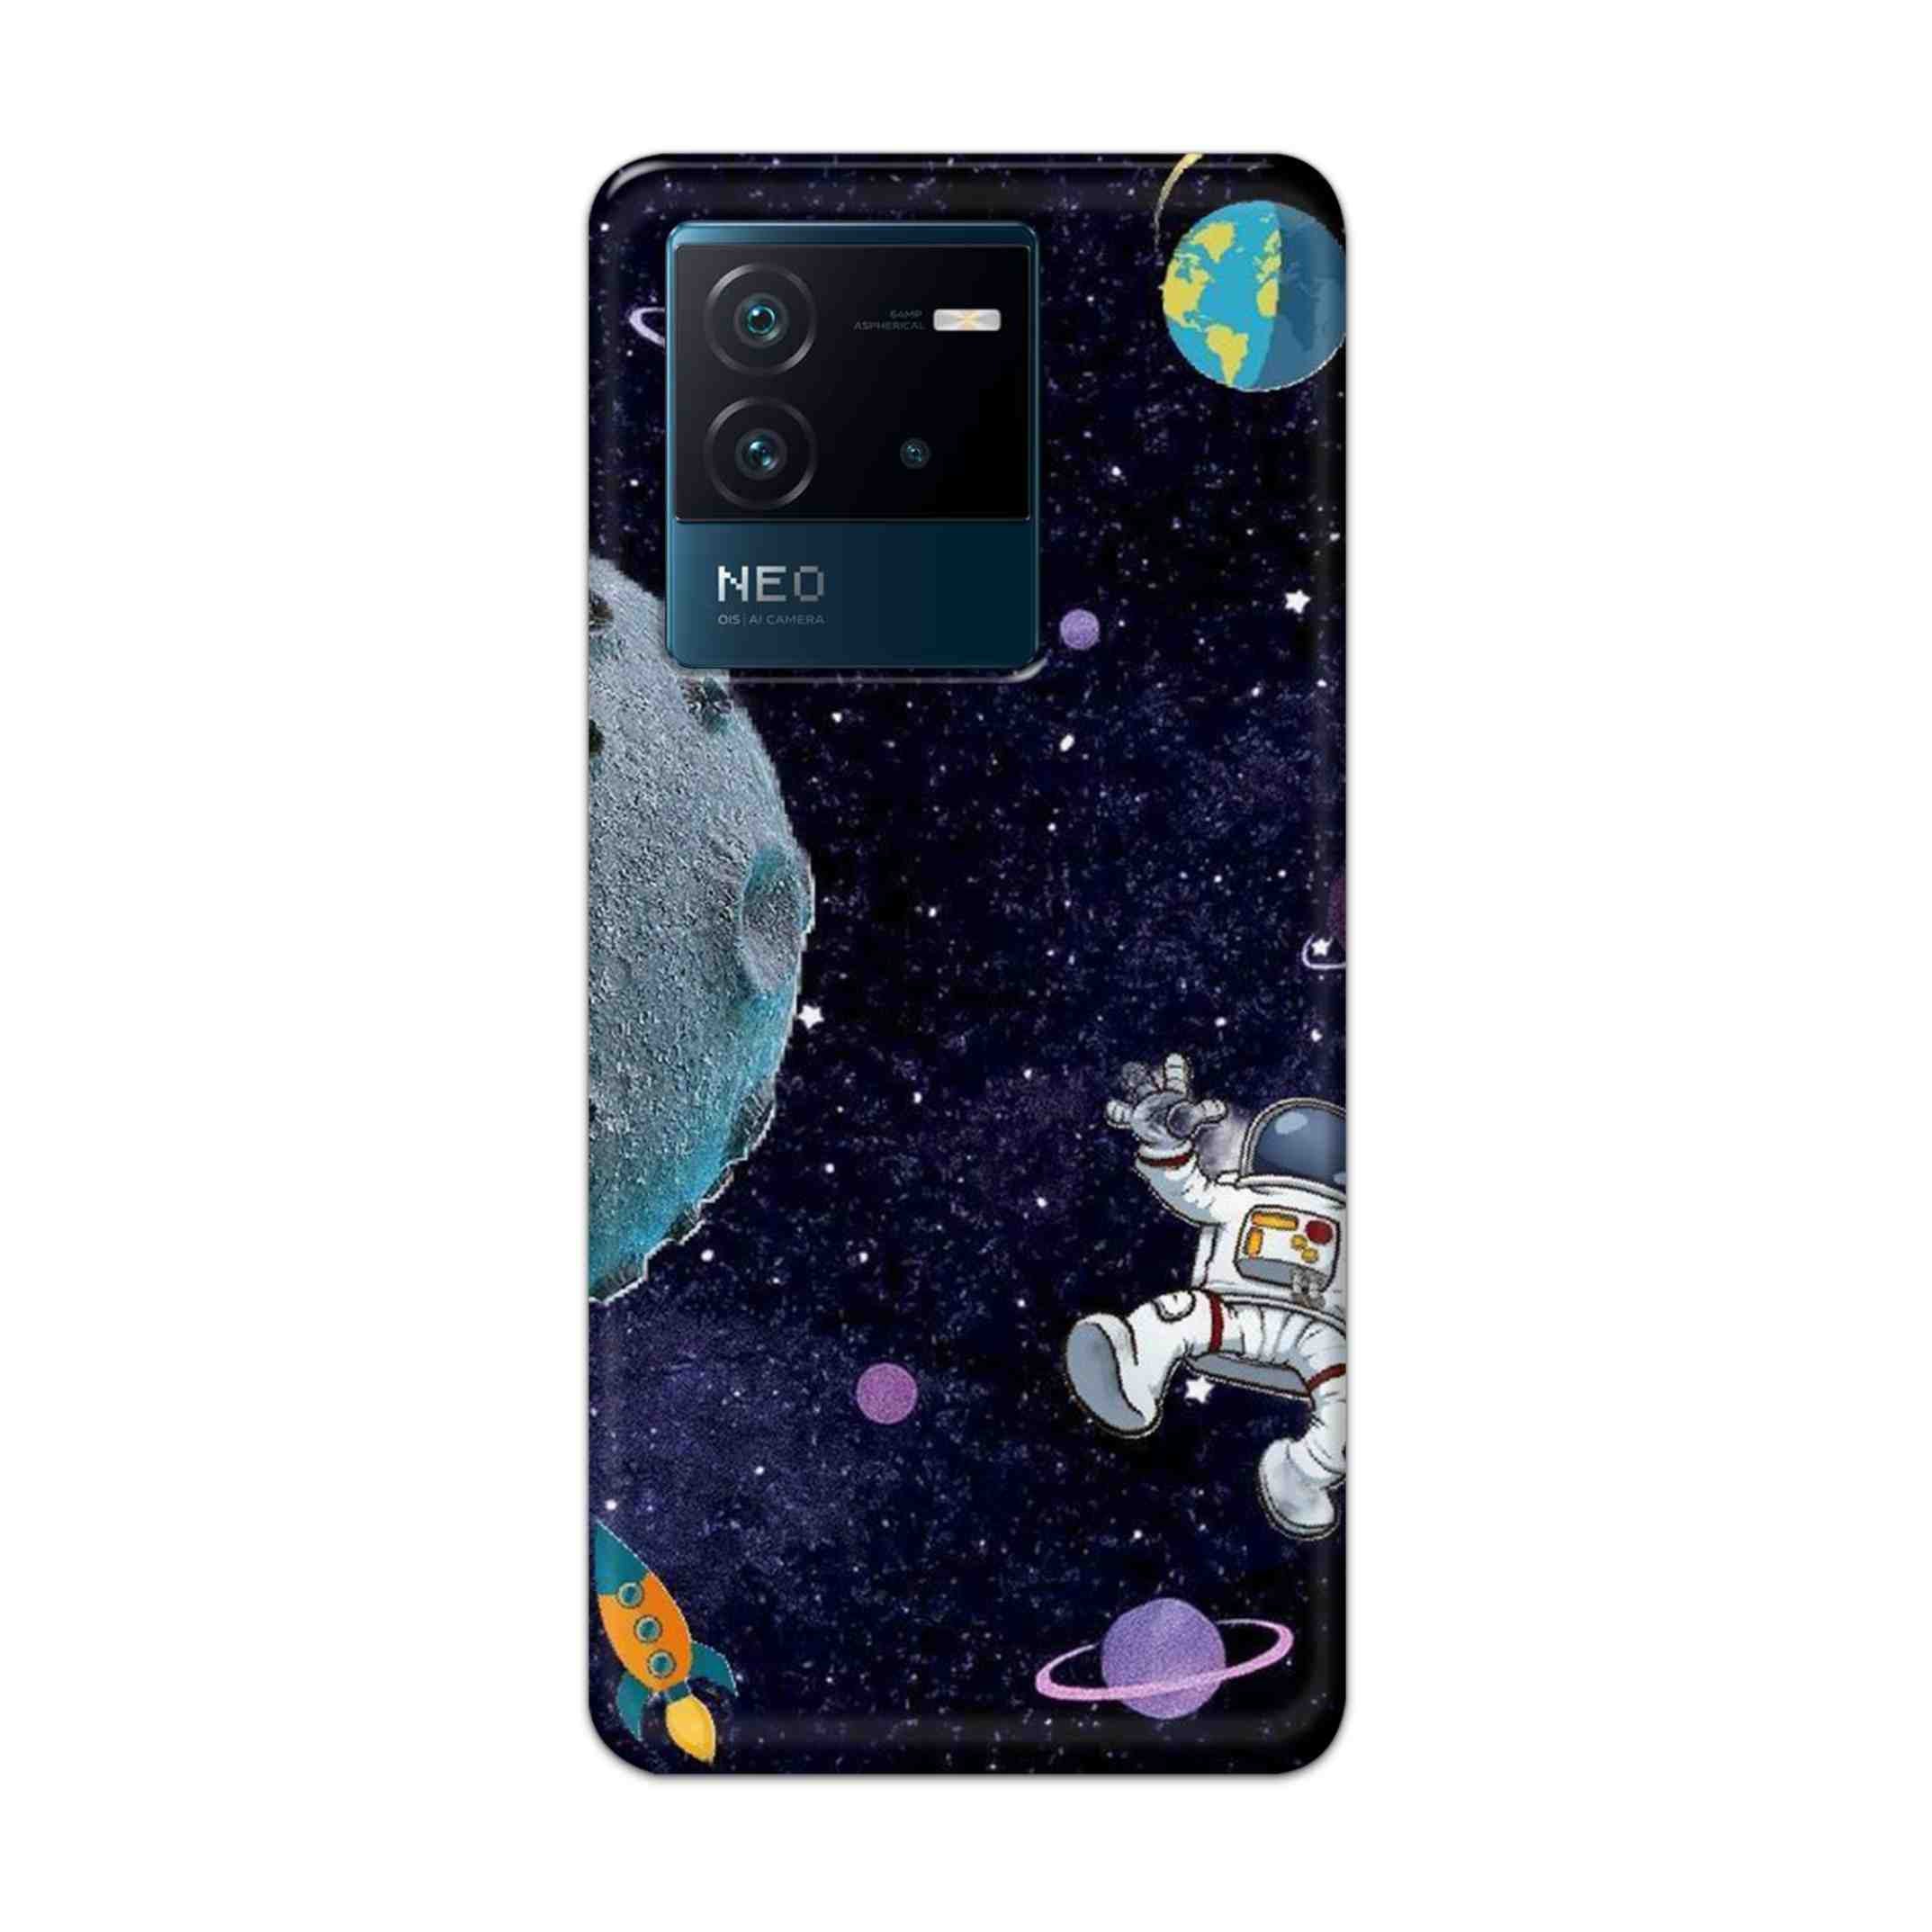 Buy Space Hard Back Mobile Phone Case Cover For iQOO Neo 6 5G Online